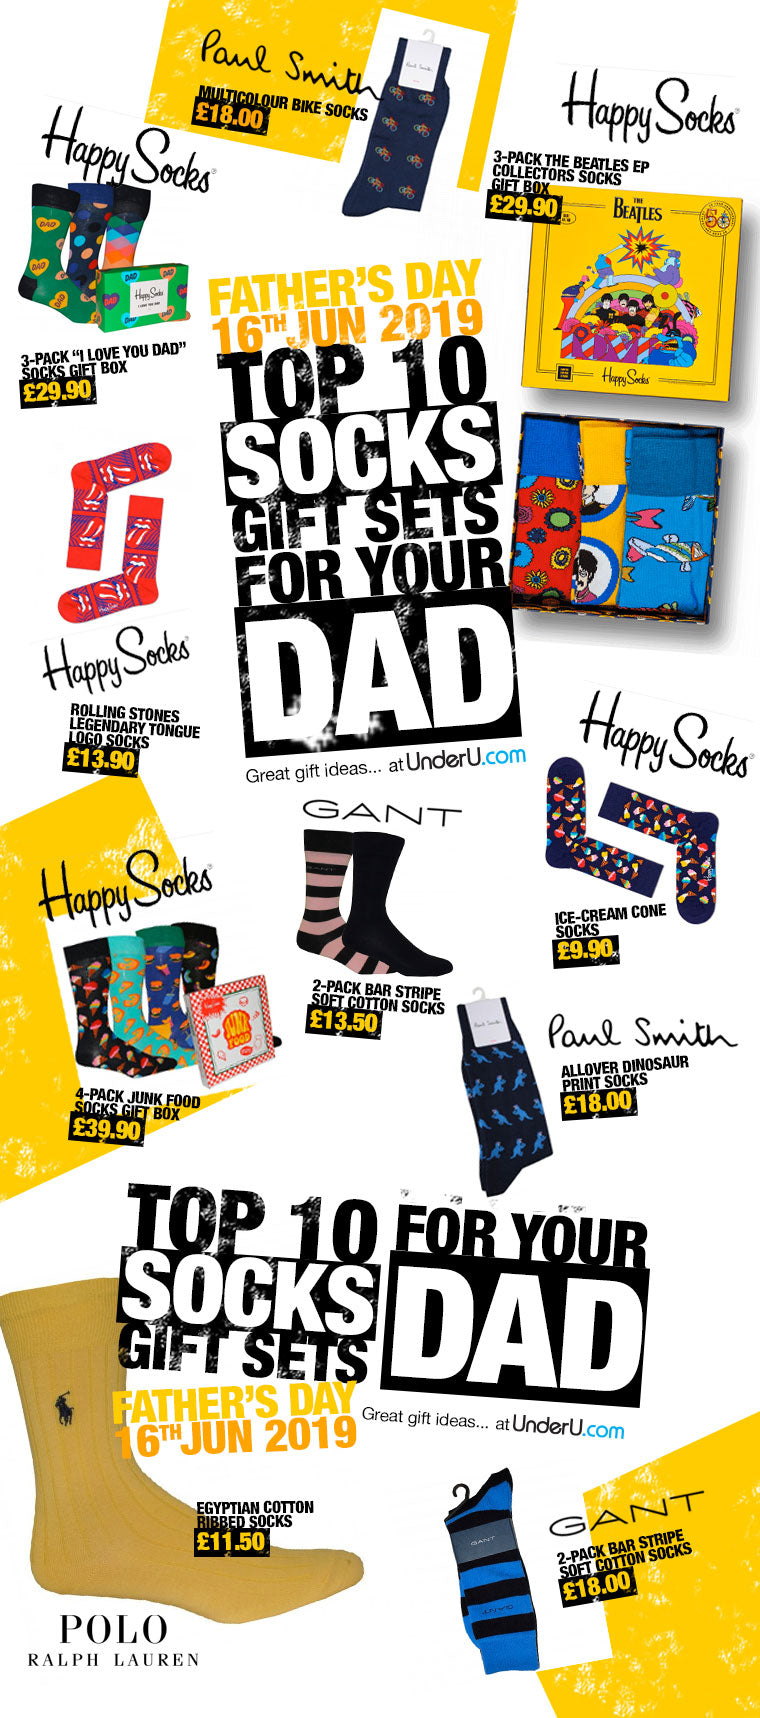 Father's Day 2019 - Top 10 sock gift sets for your Dad